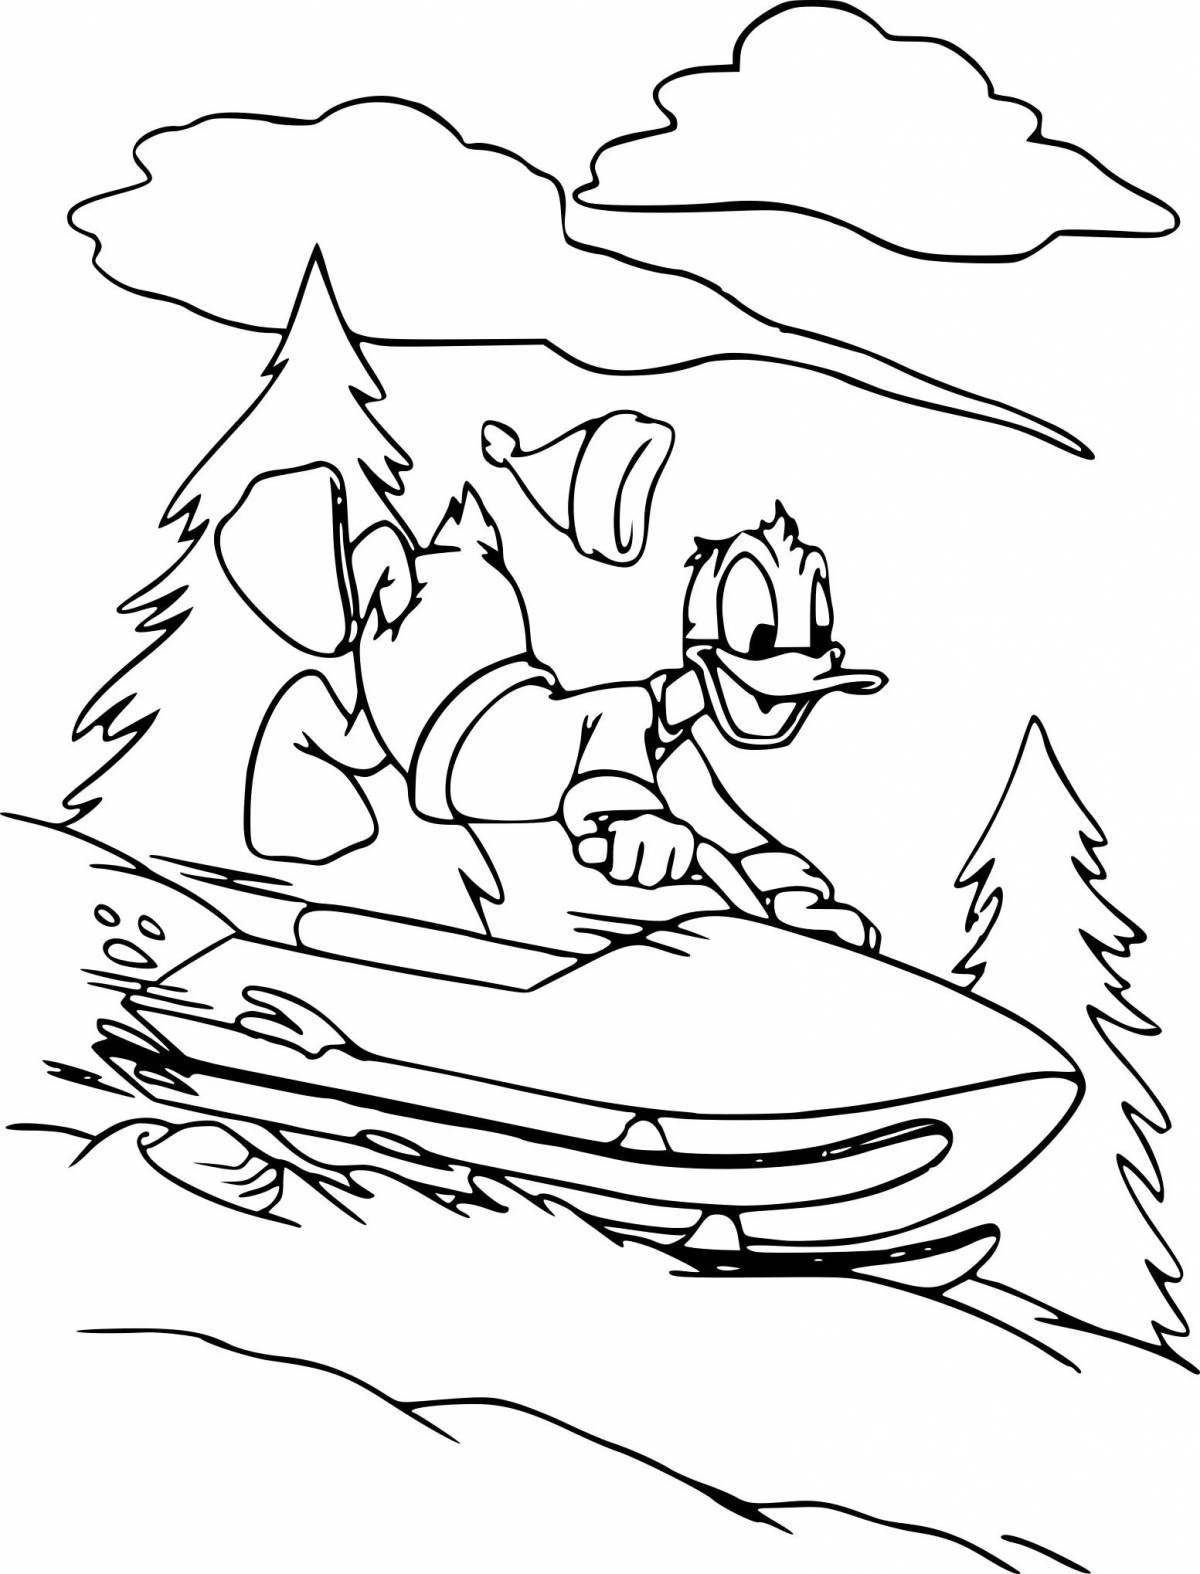 Snowmobile coloring book for kids